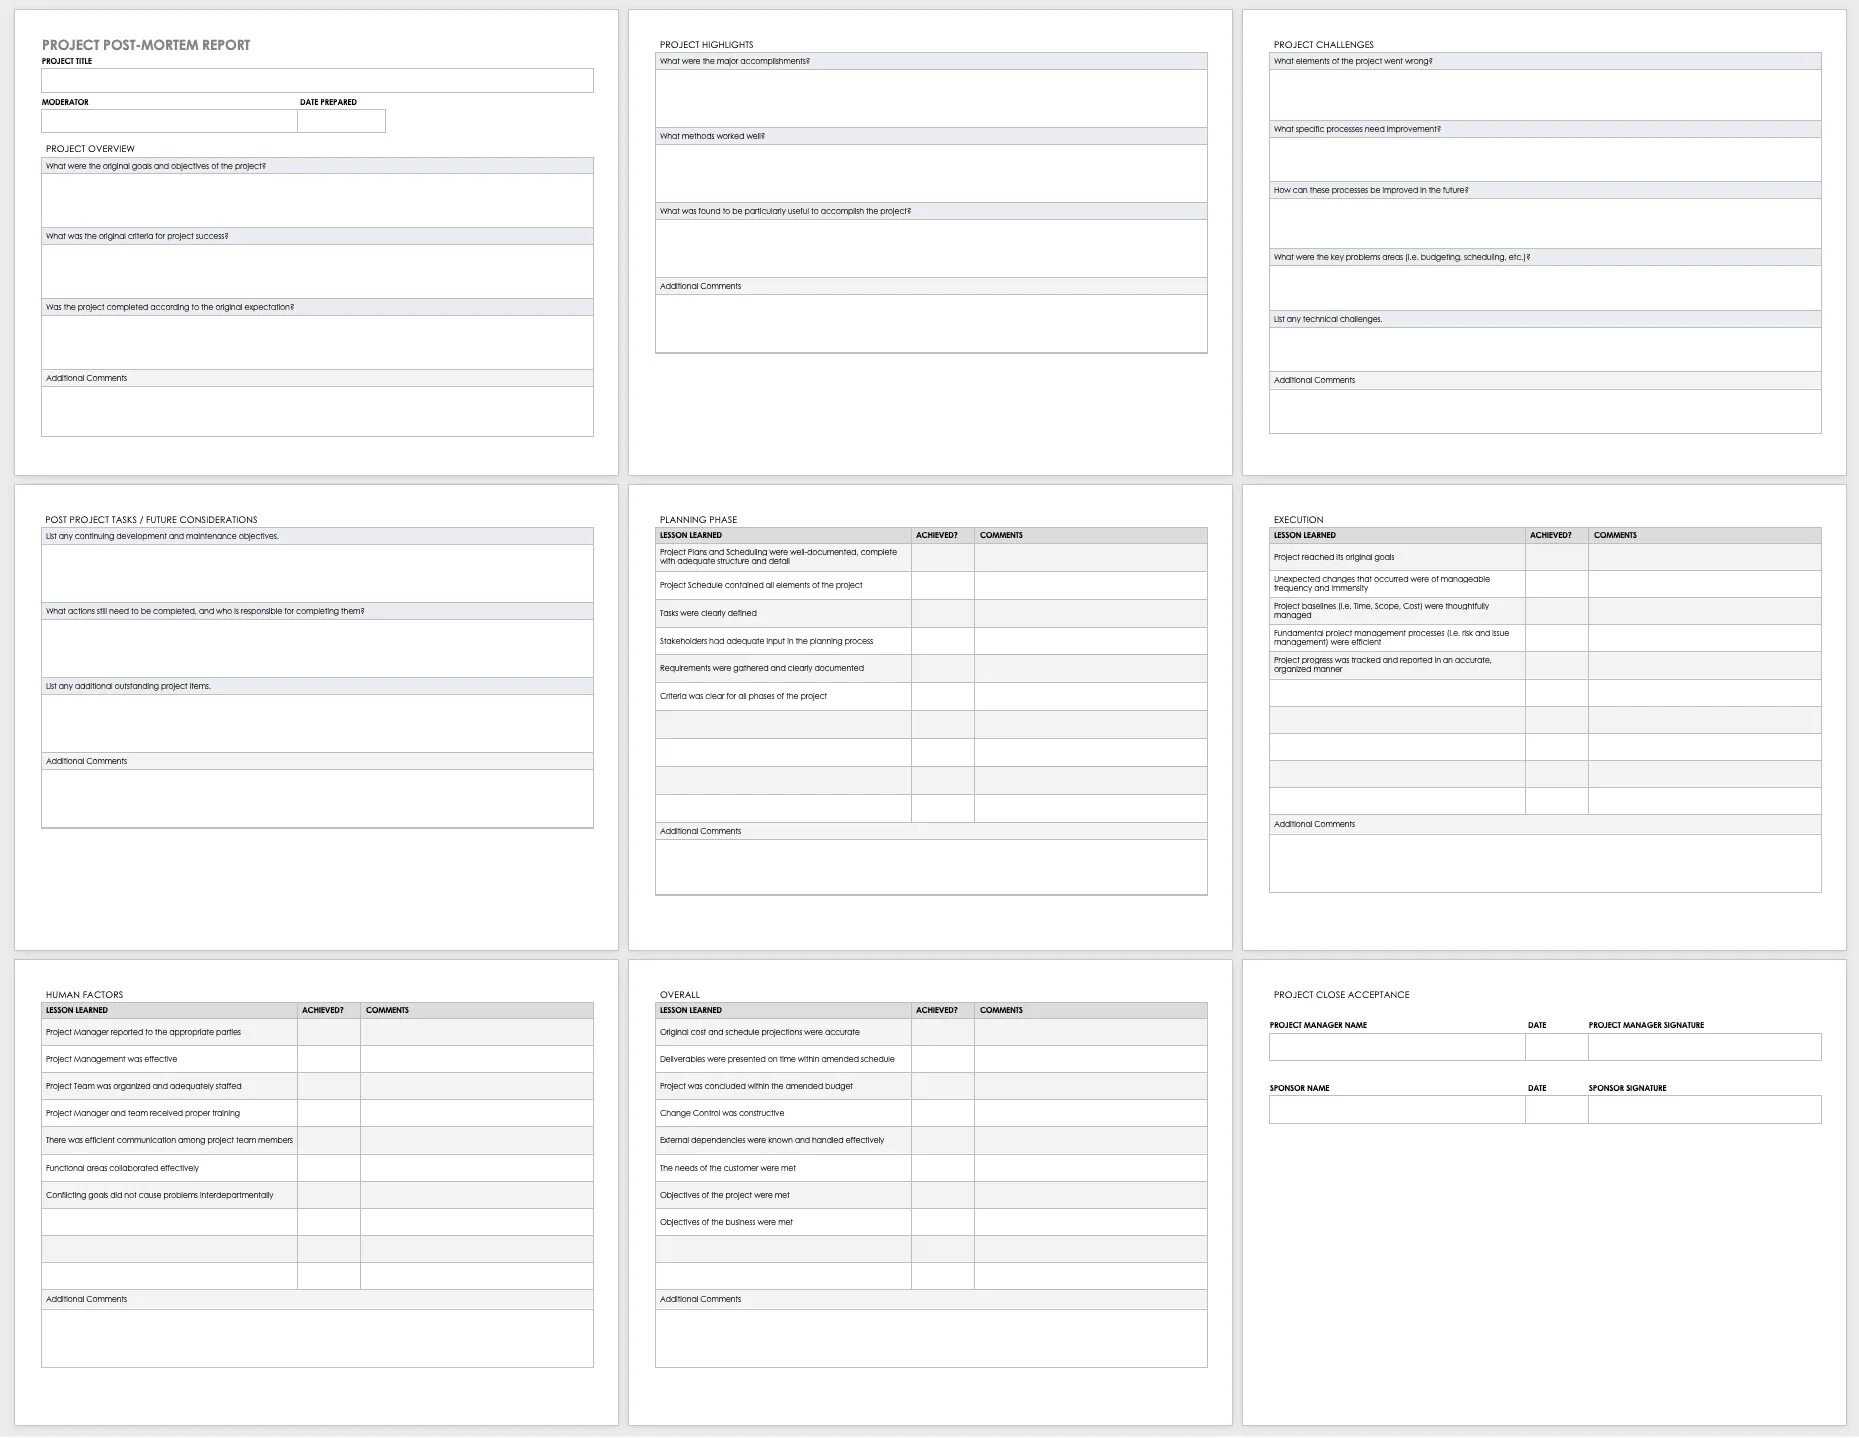 Post Mortem Report Template. My Report Project. Report Post.